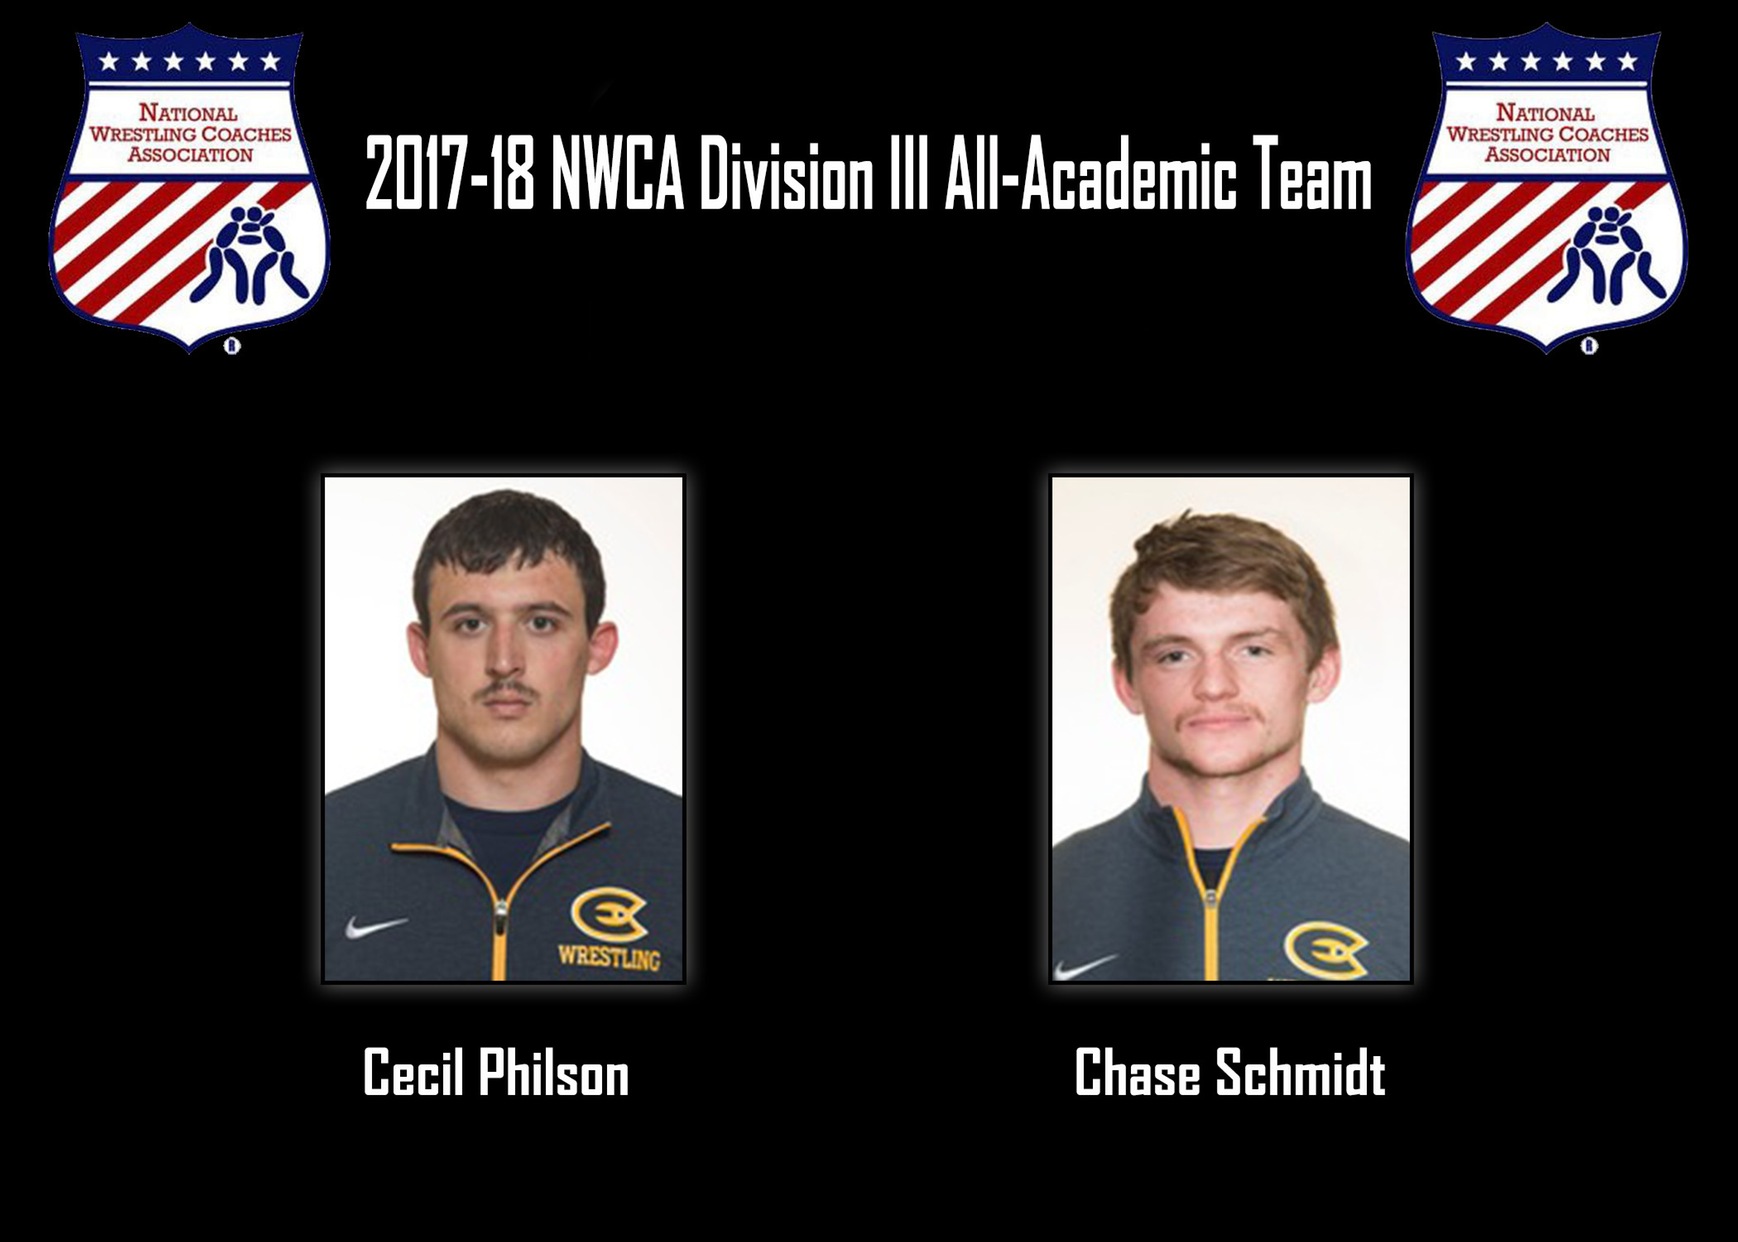 Philson and Schmidt added to NWCA Division III All-Academic Team